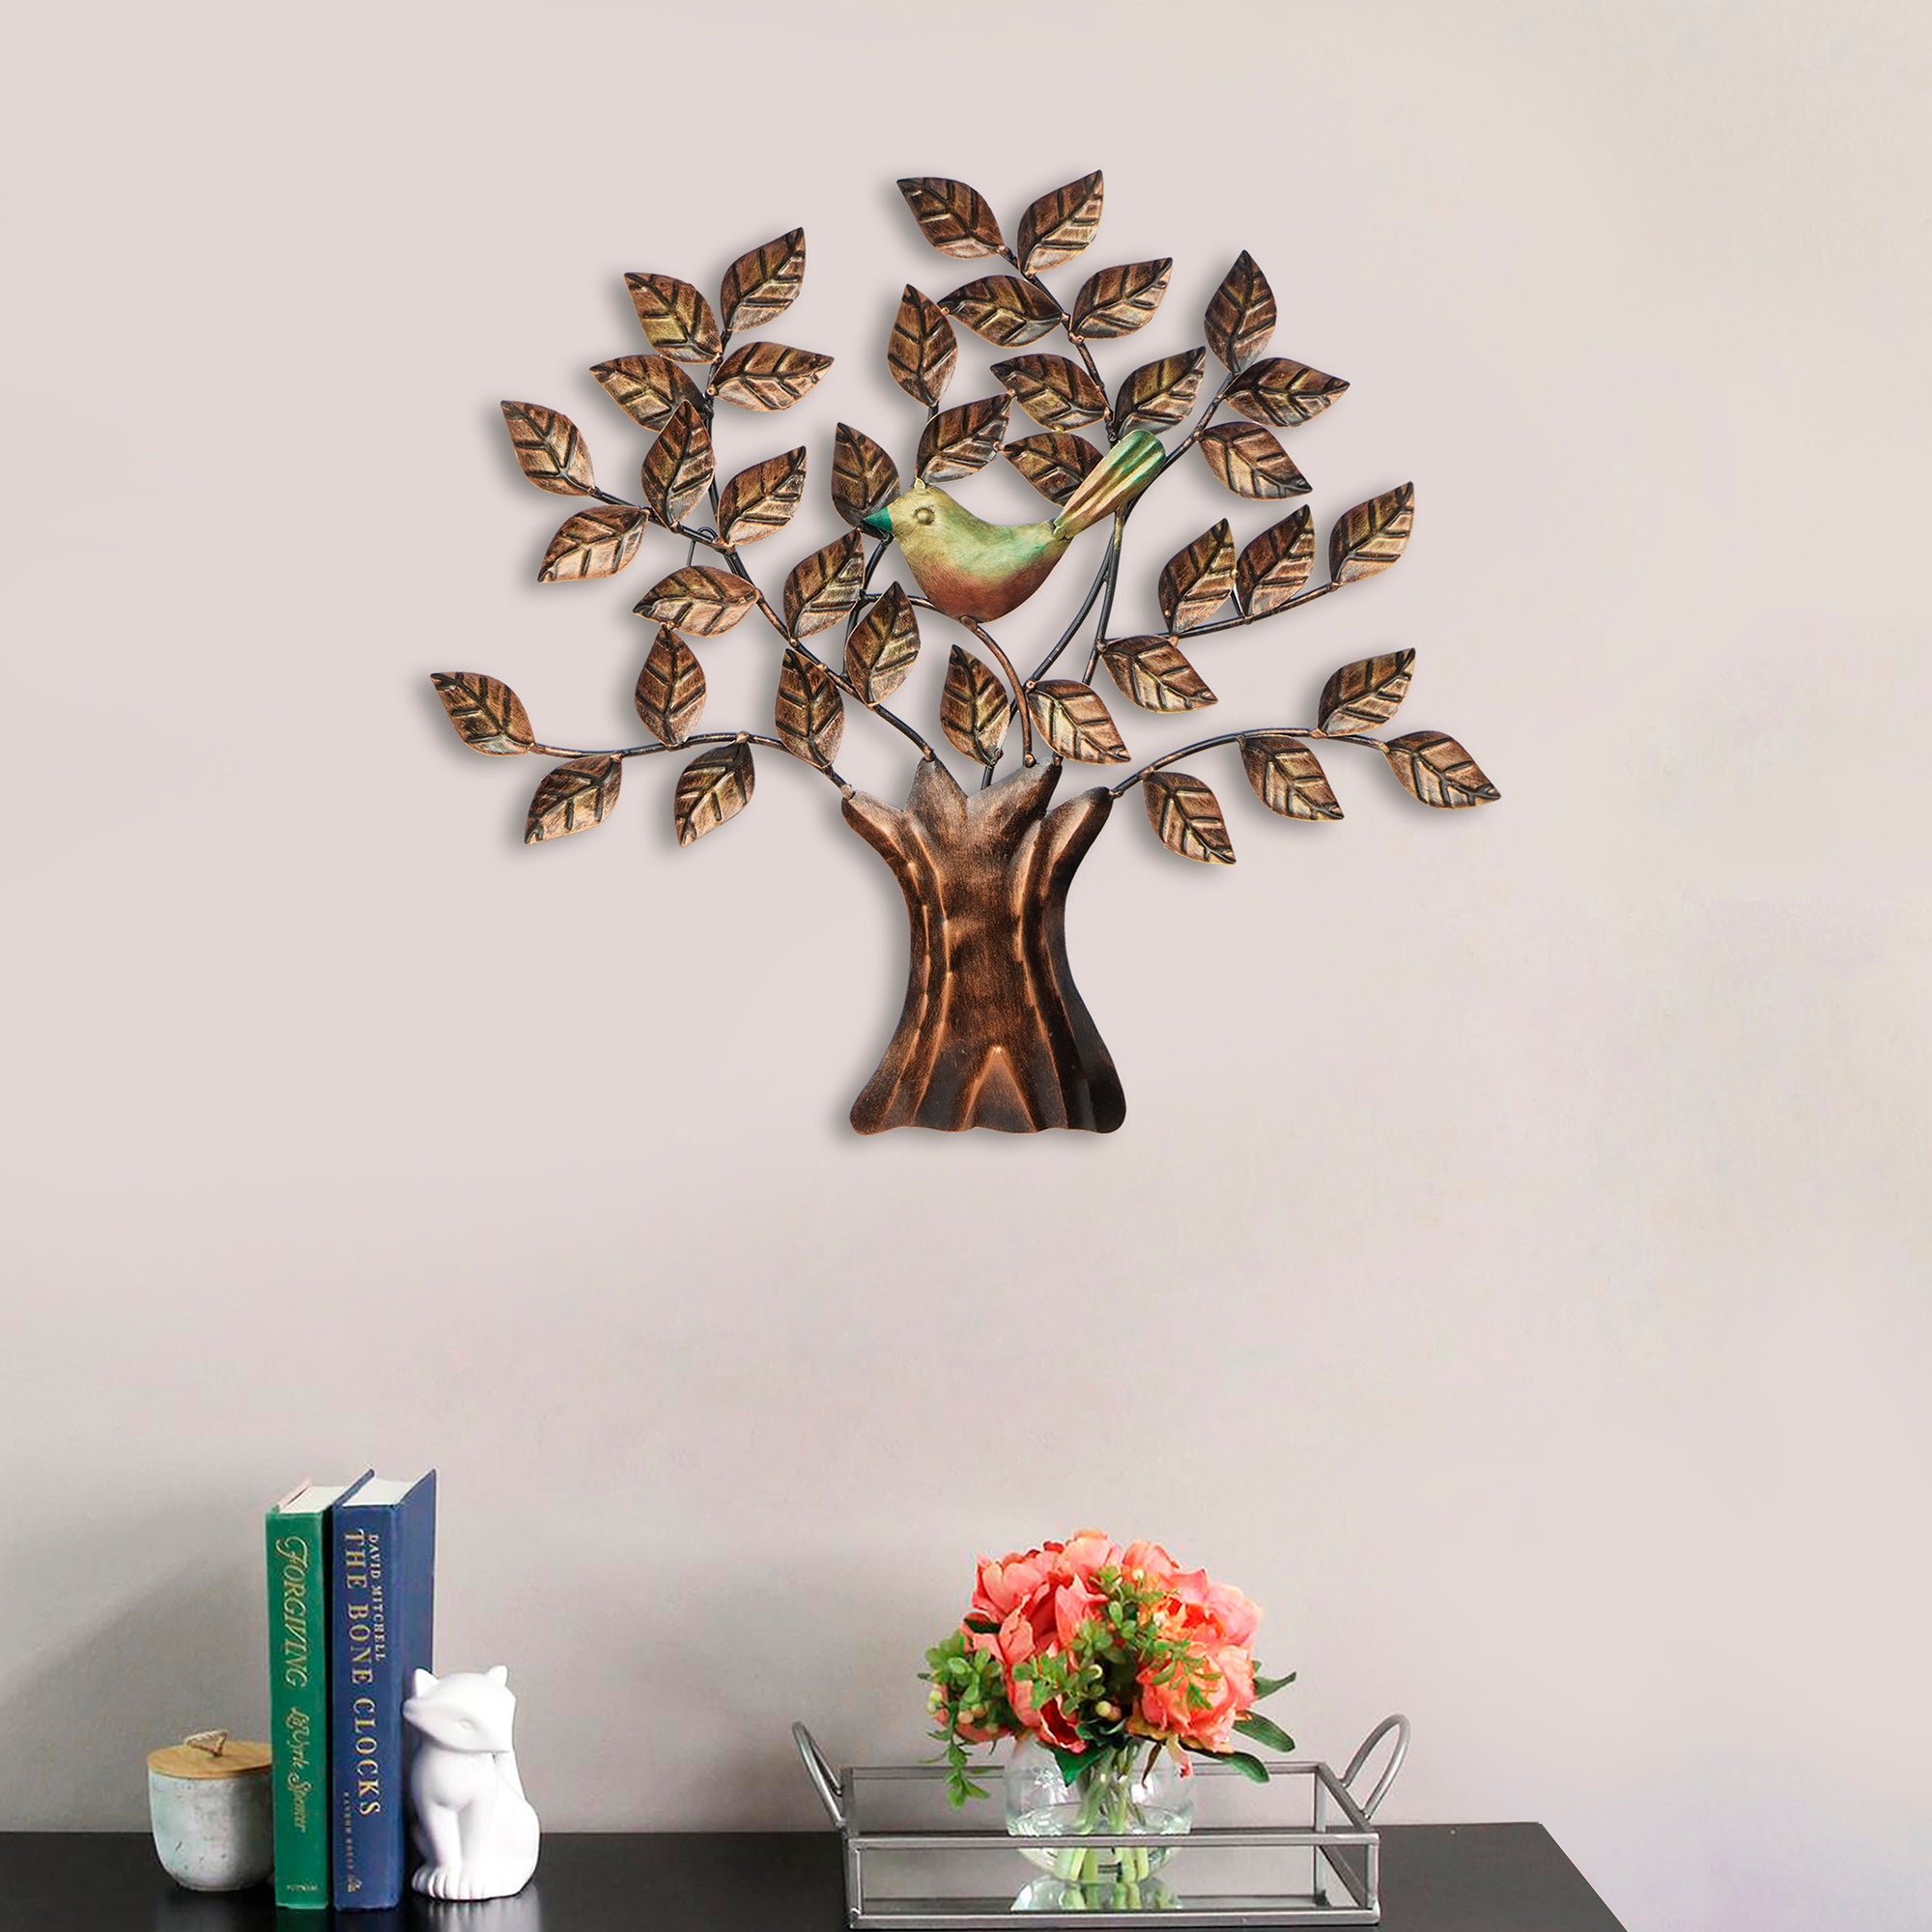 Bird Sitting On Colorful Tree Branch Handicrafted Iron Wall Hanging